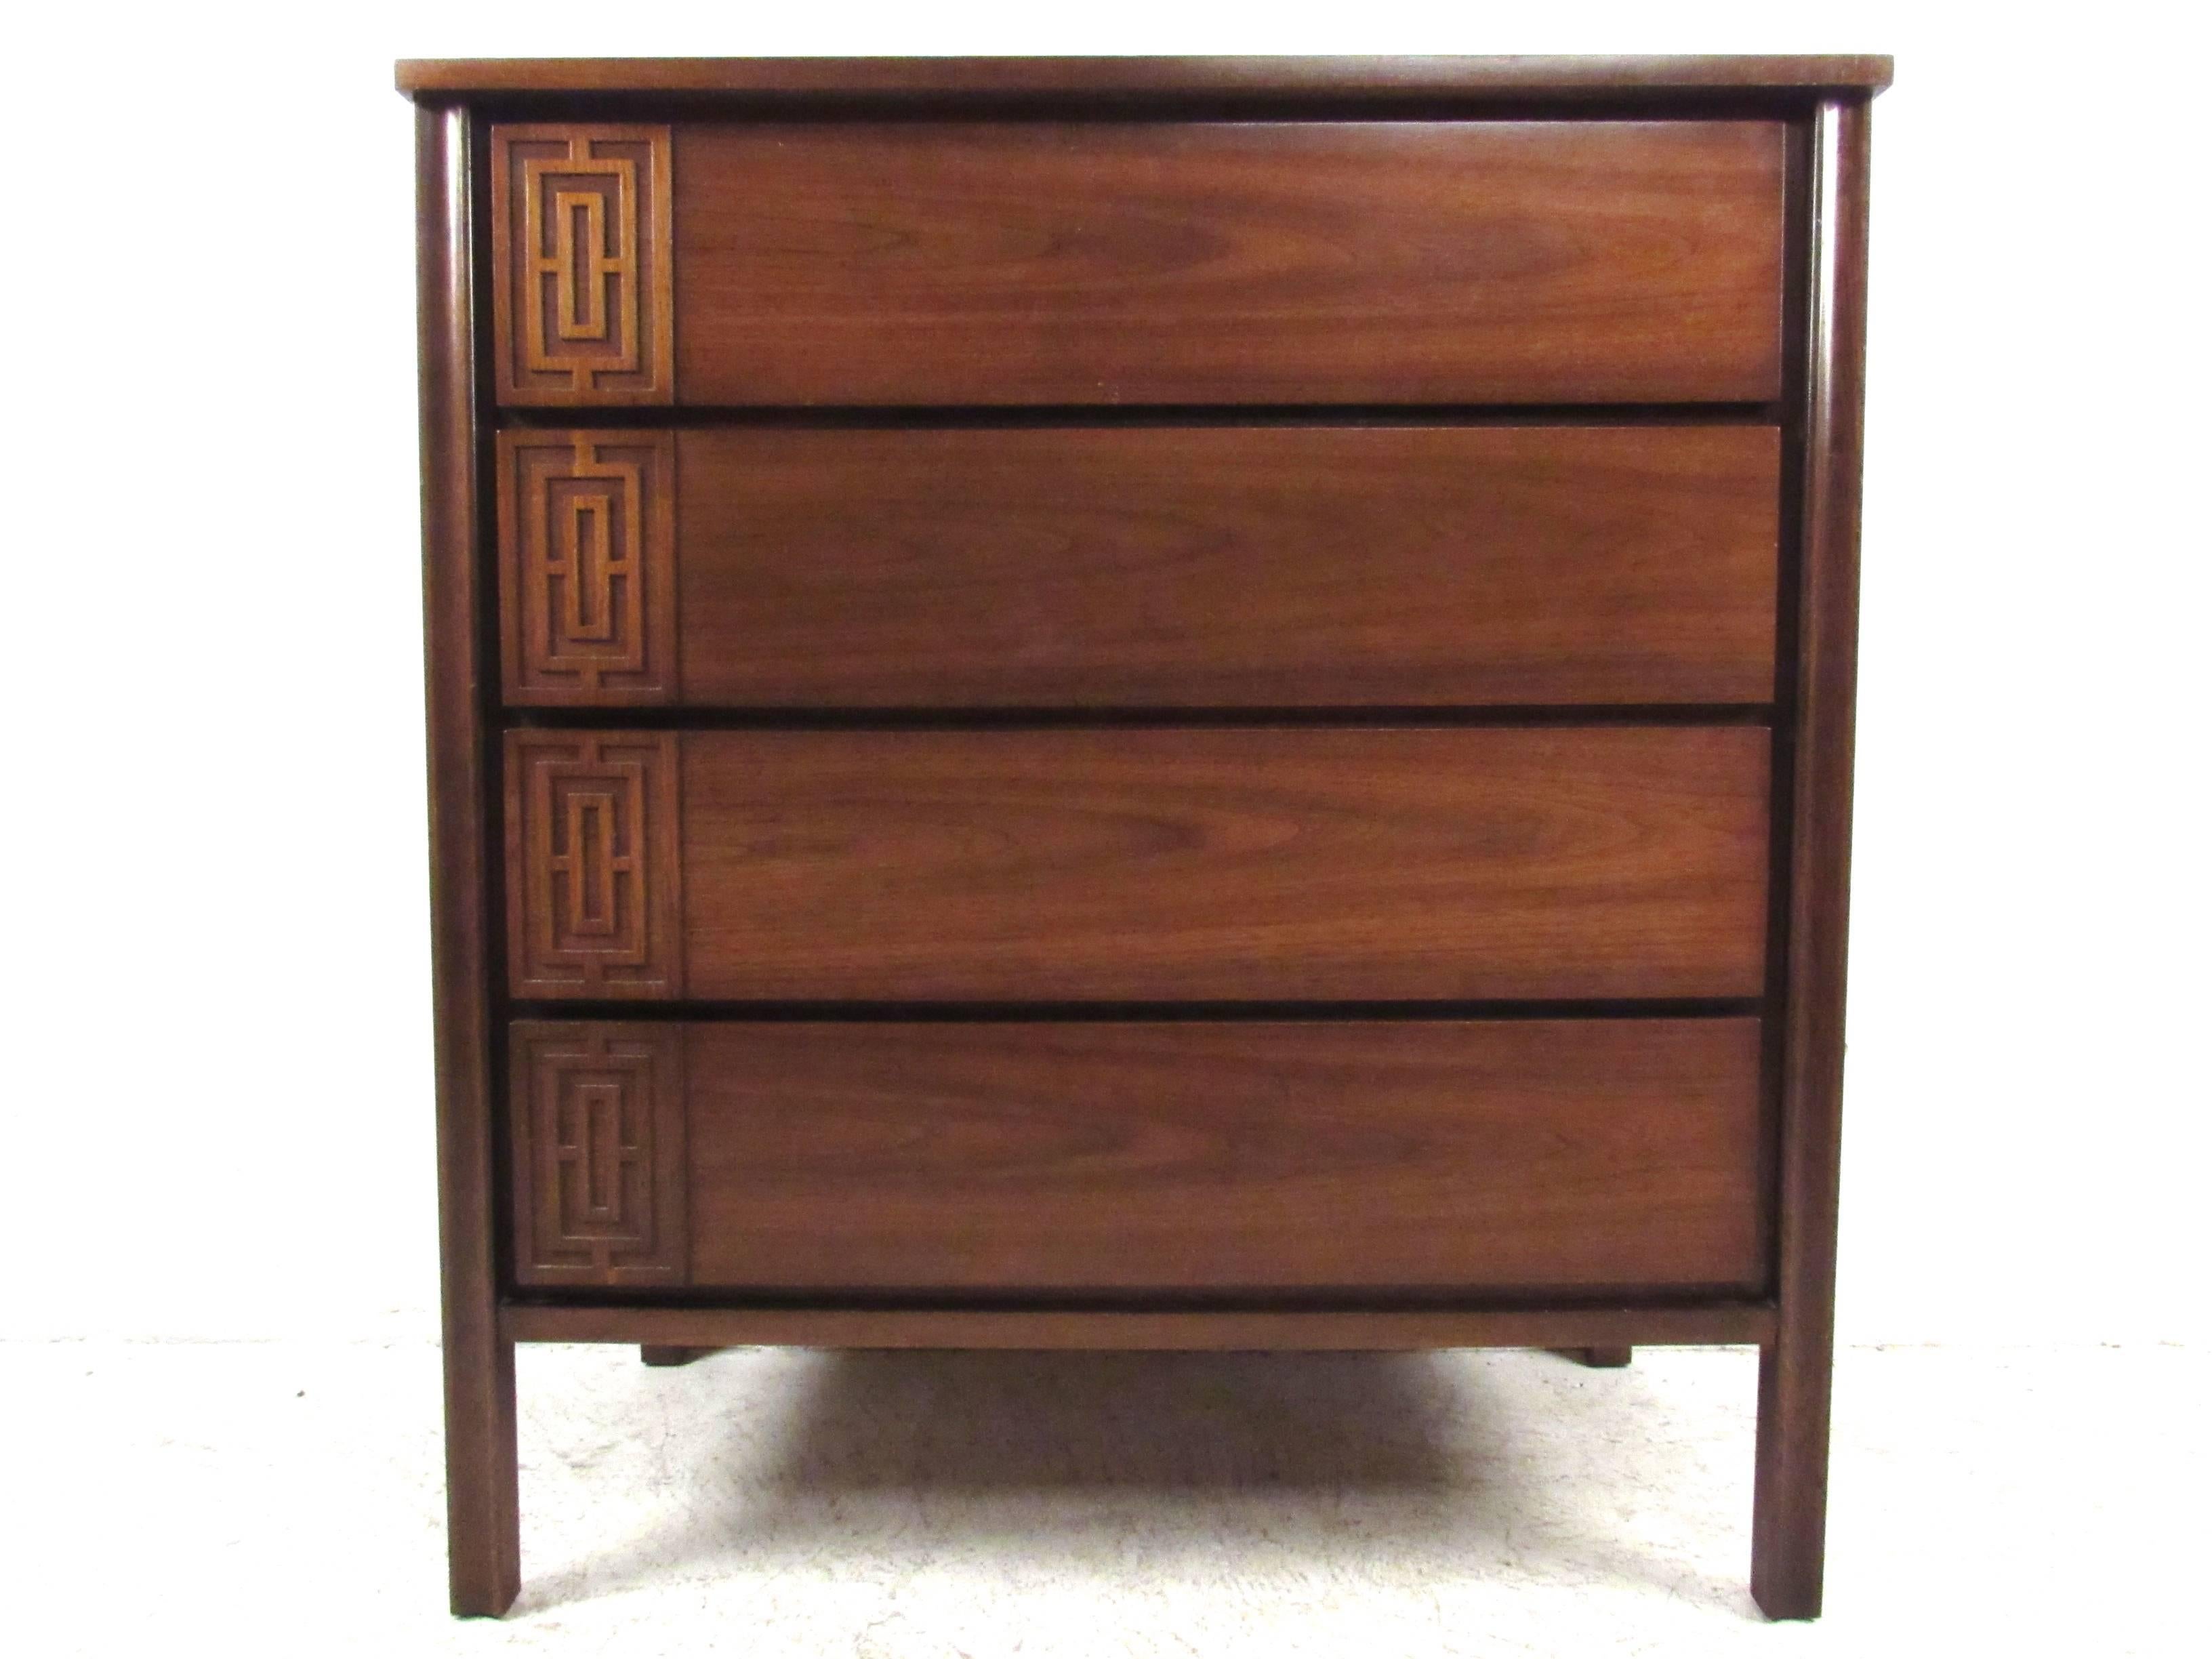 This unique matching bedroom set comes with plenty of matching storage for any bedroom. Nine-drawer low dresser pairs perfectly with matching mirrors, pair of nightstands and a four-drawer highboy dresser. Matching walnut headboard also included.